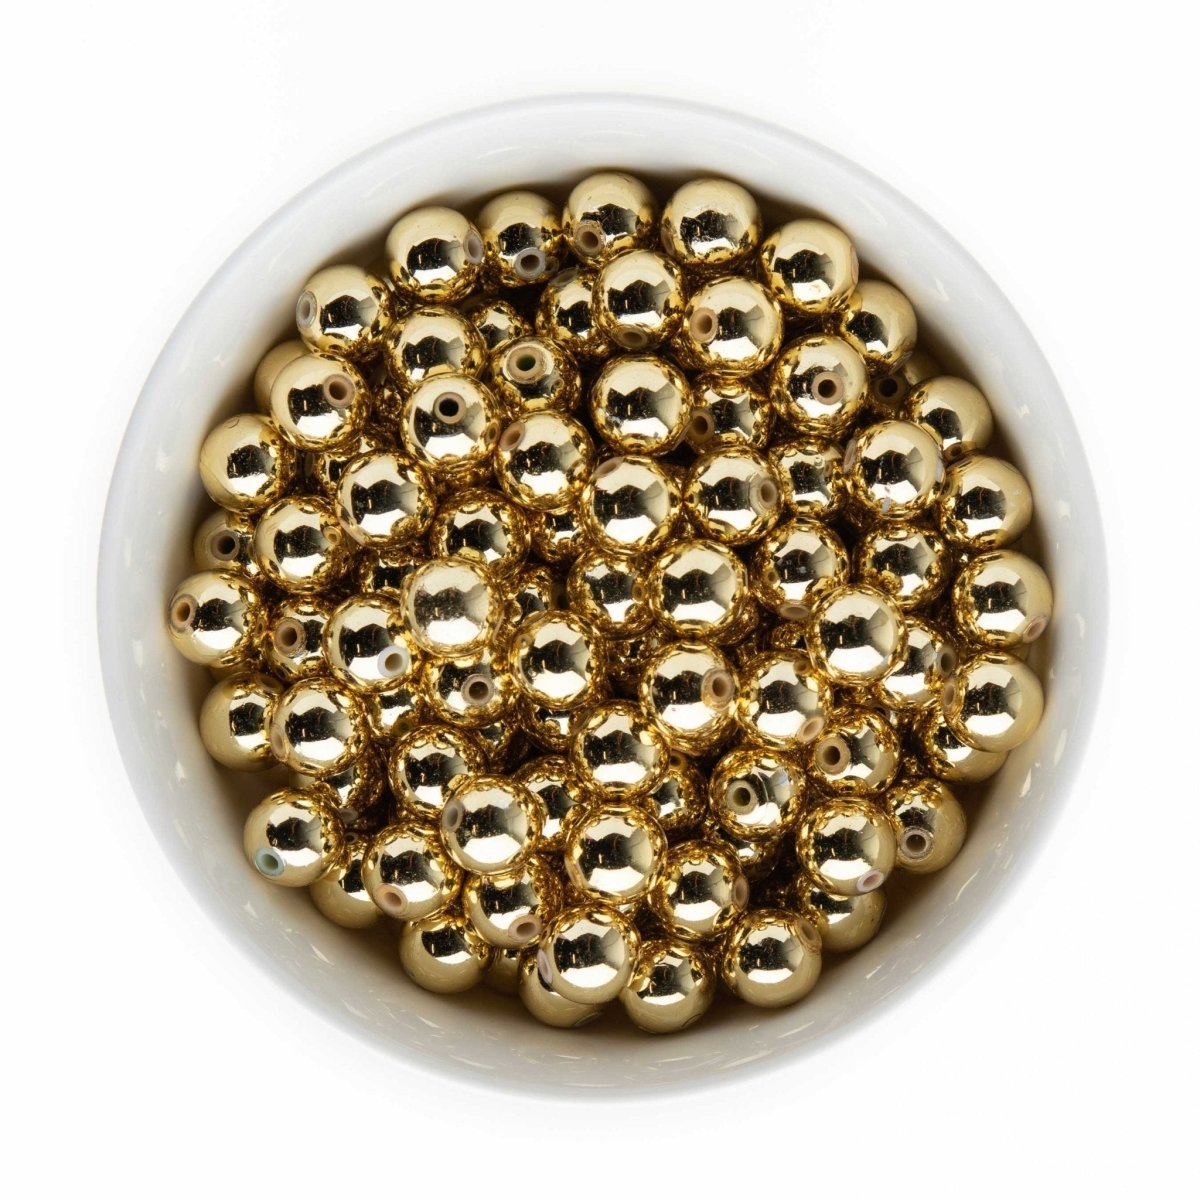 Acrylic Round Beads Metallic 12mm Gold from Cara & Co Craft Supply